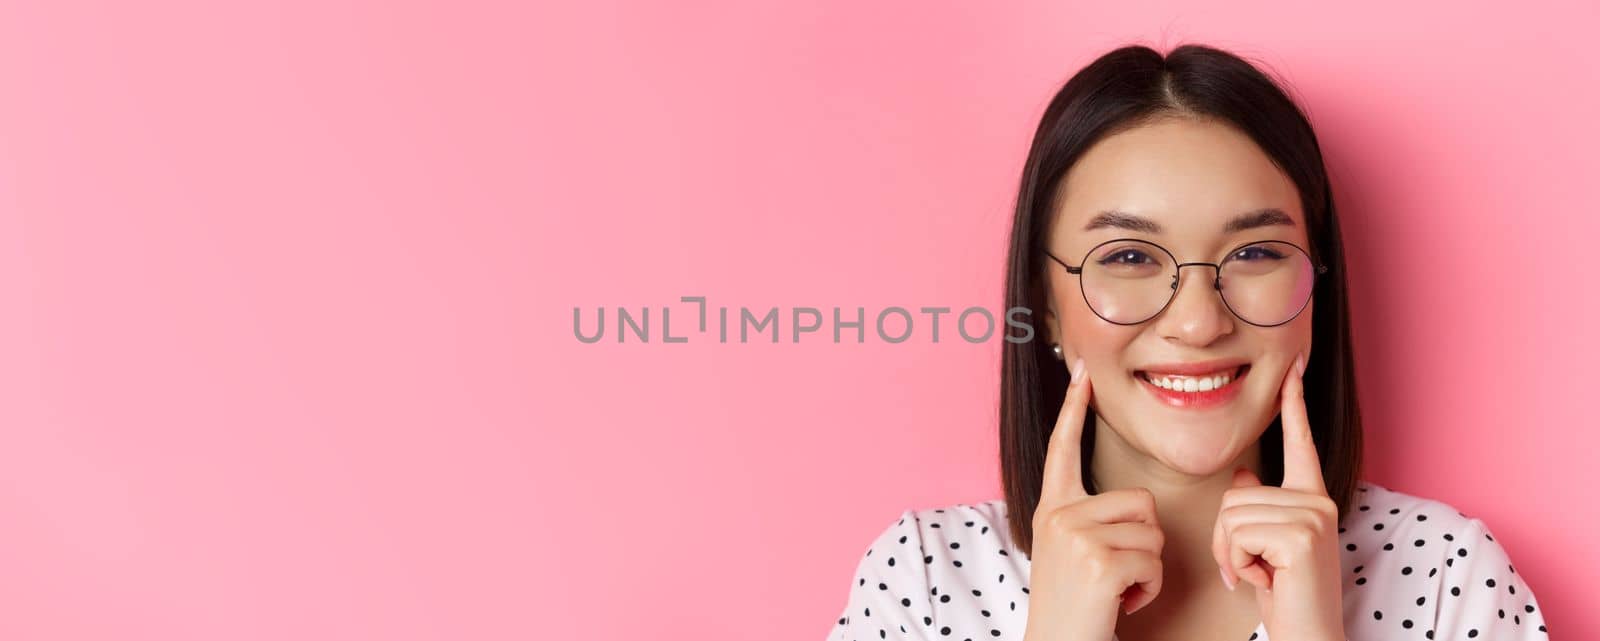 Beauty concept. Headshot of adorable asian girl in trendy glasses smiling, poking cheeks and showing cute dimples, standing over pink background.